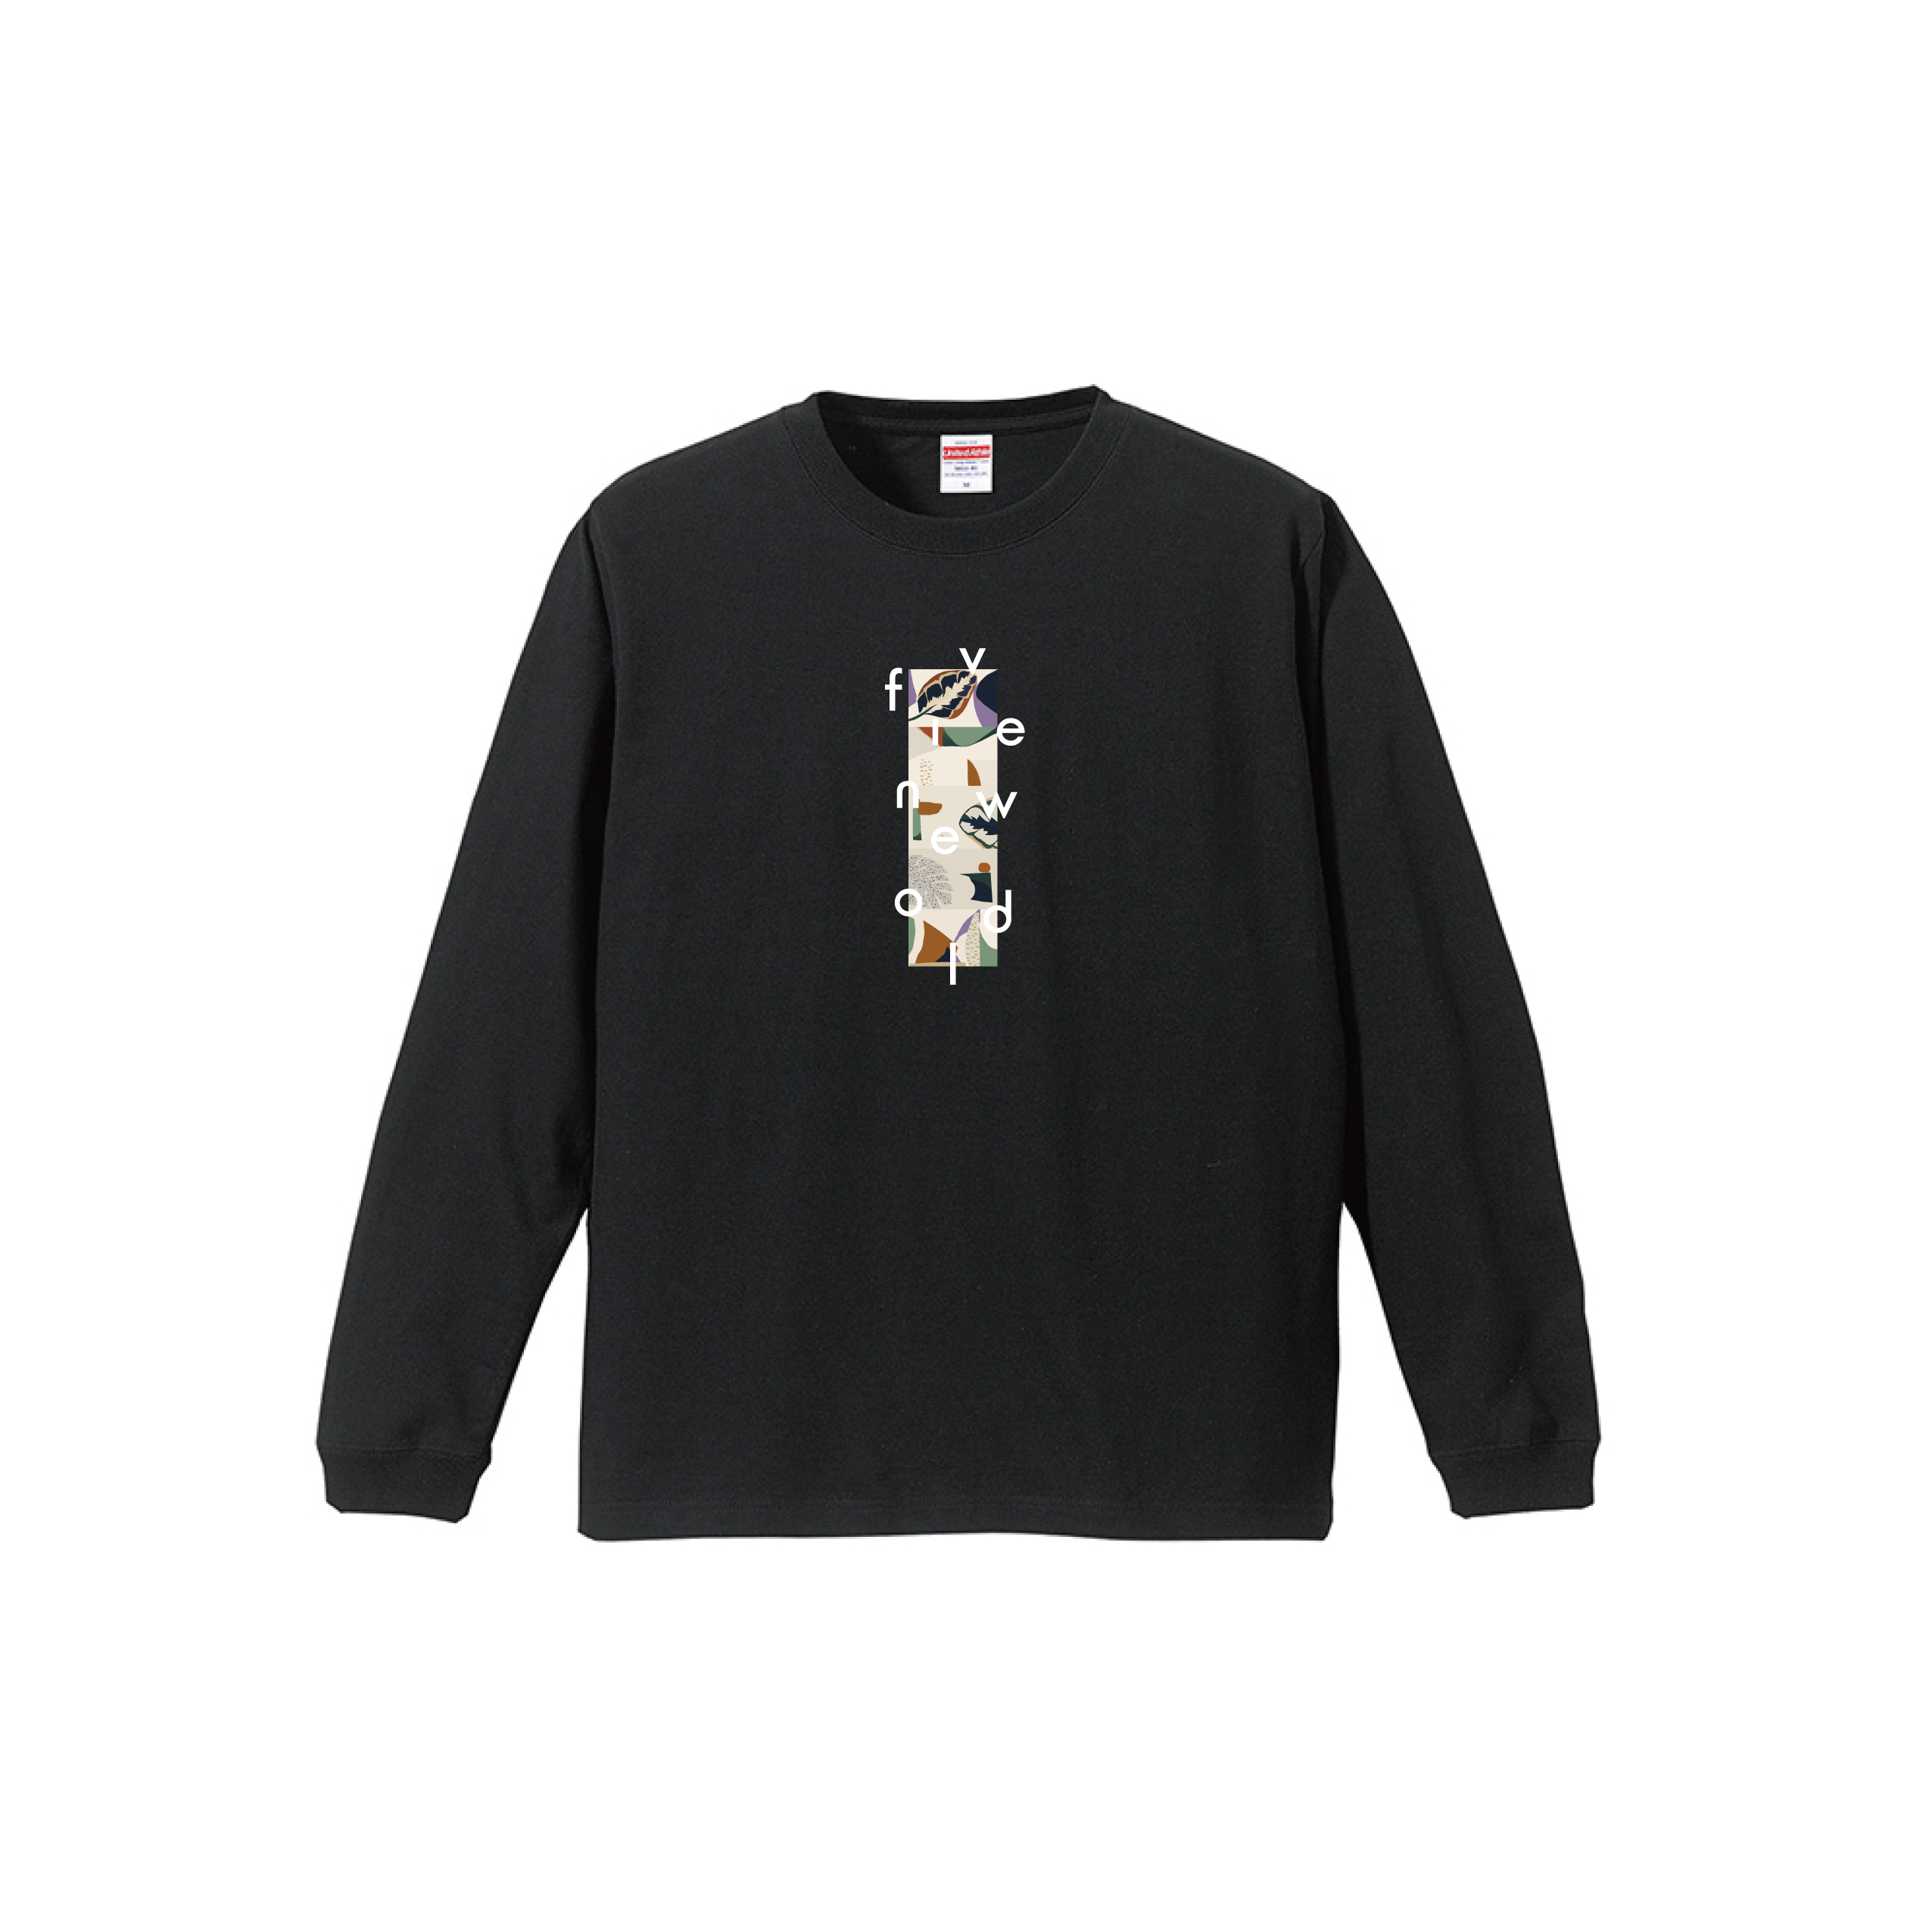 "Painting Your Town" Long Sleeve[Black]